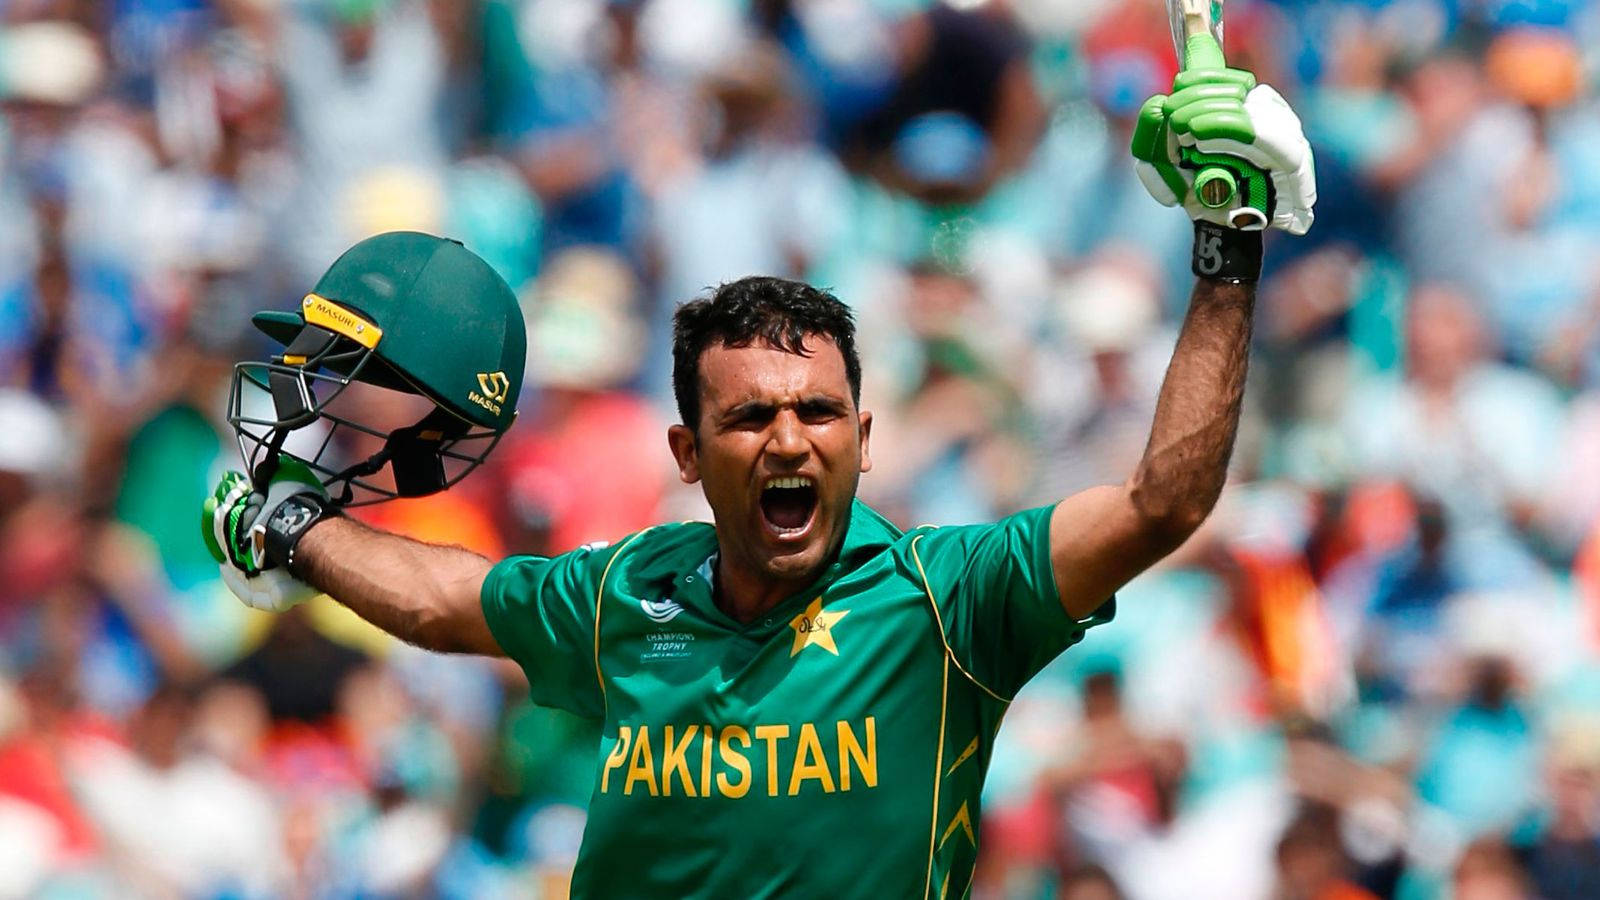 Fakhar Zaman Open Arms Background